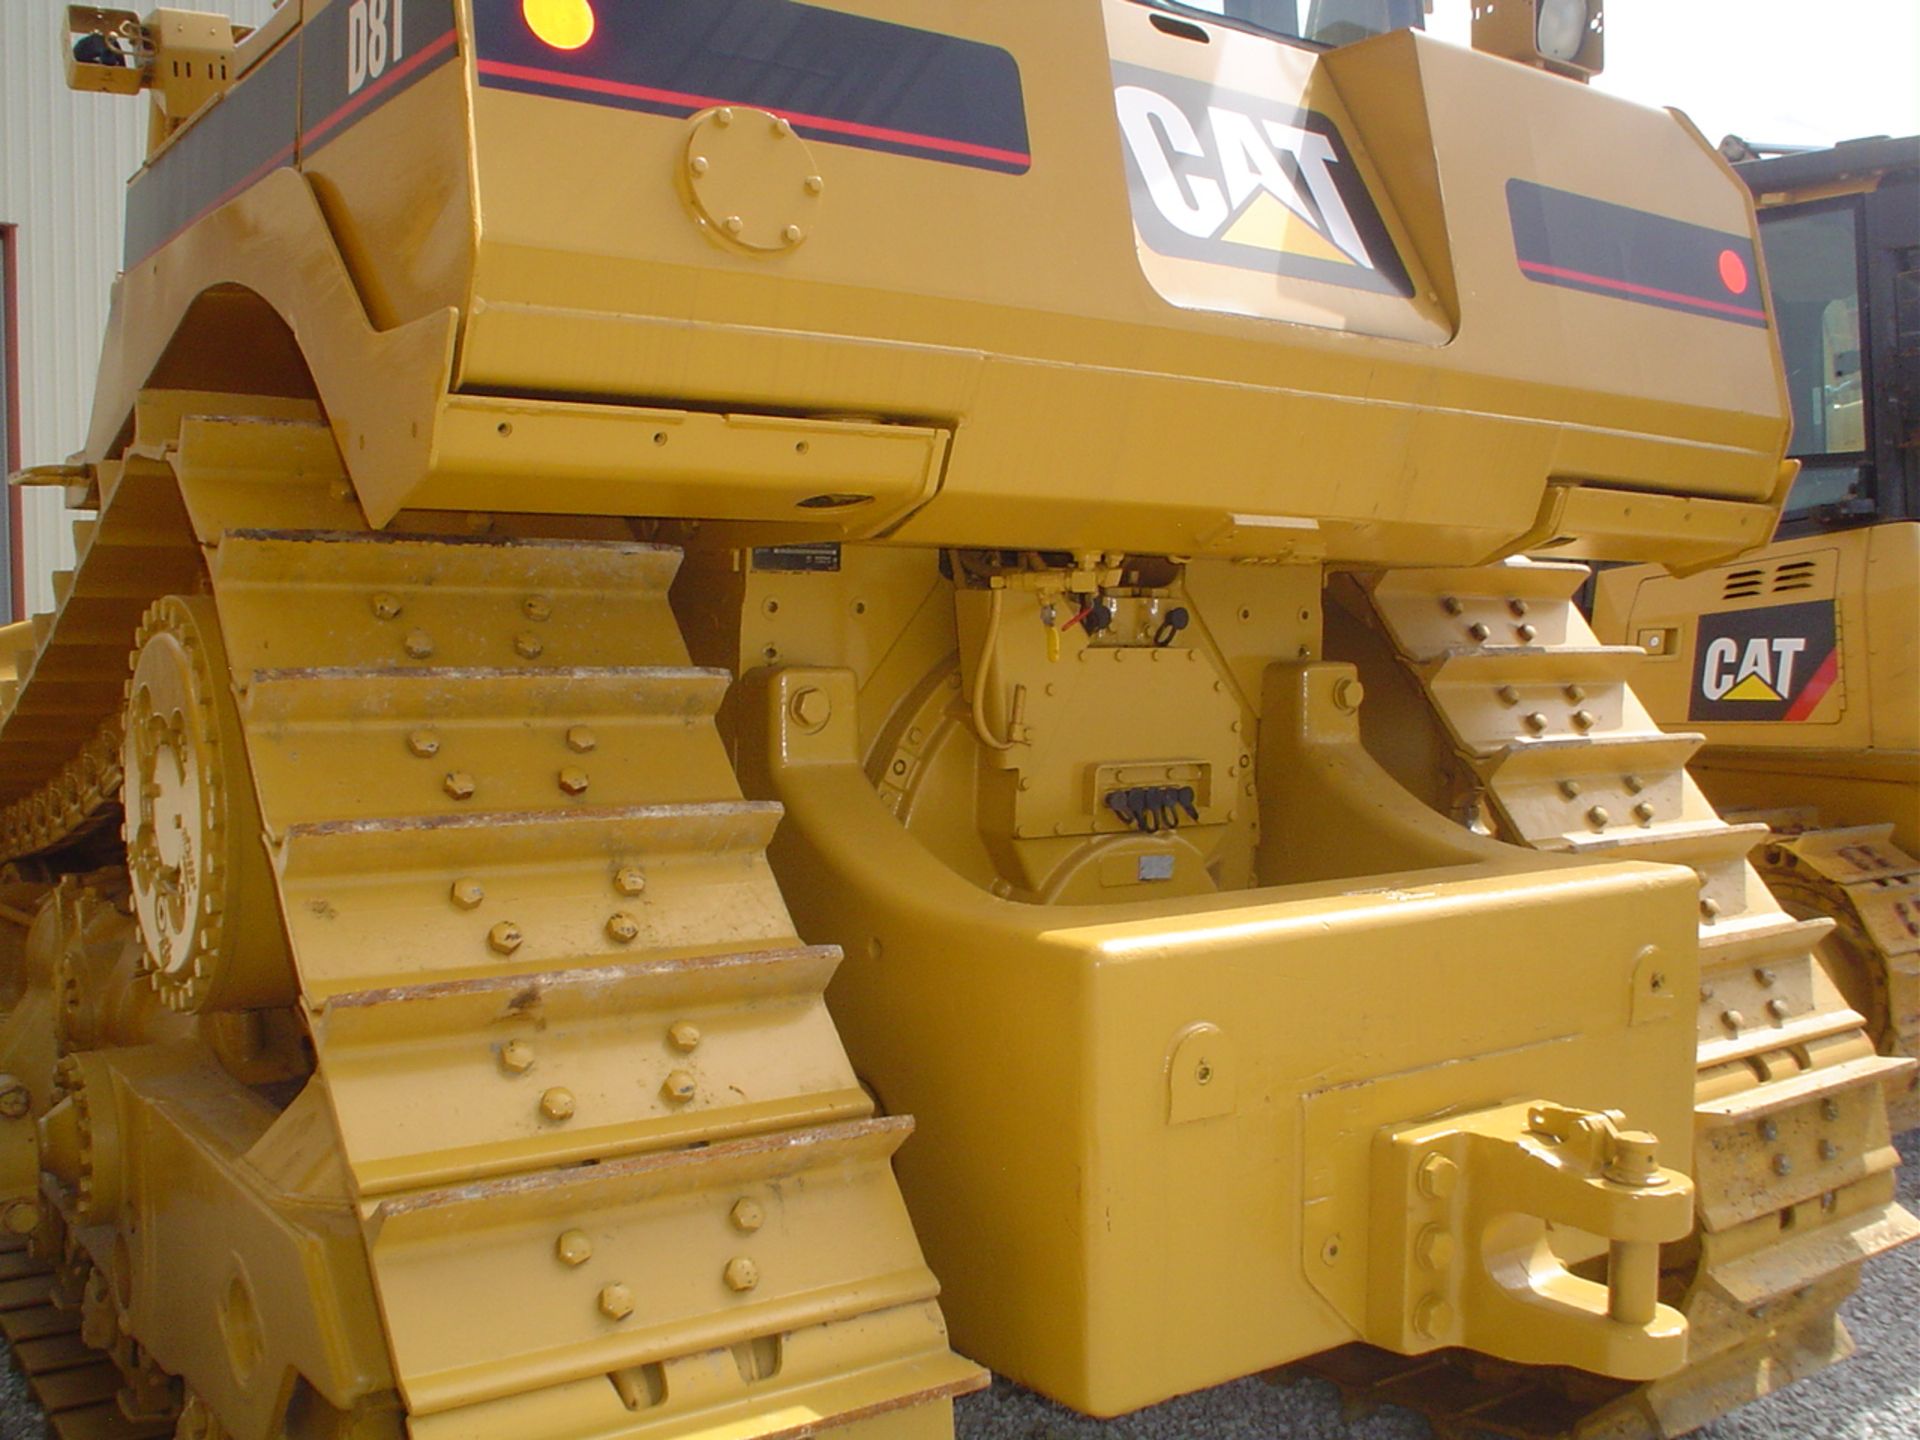 2009 CATERPILLAR D8T CRAWLER TRACTOR, ENCLOSED CAB, 24'' WIDE PADS, 12-1/2' U-SHAPED BLADE, NEW - Image 3 of 4